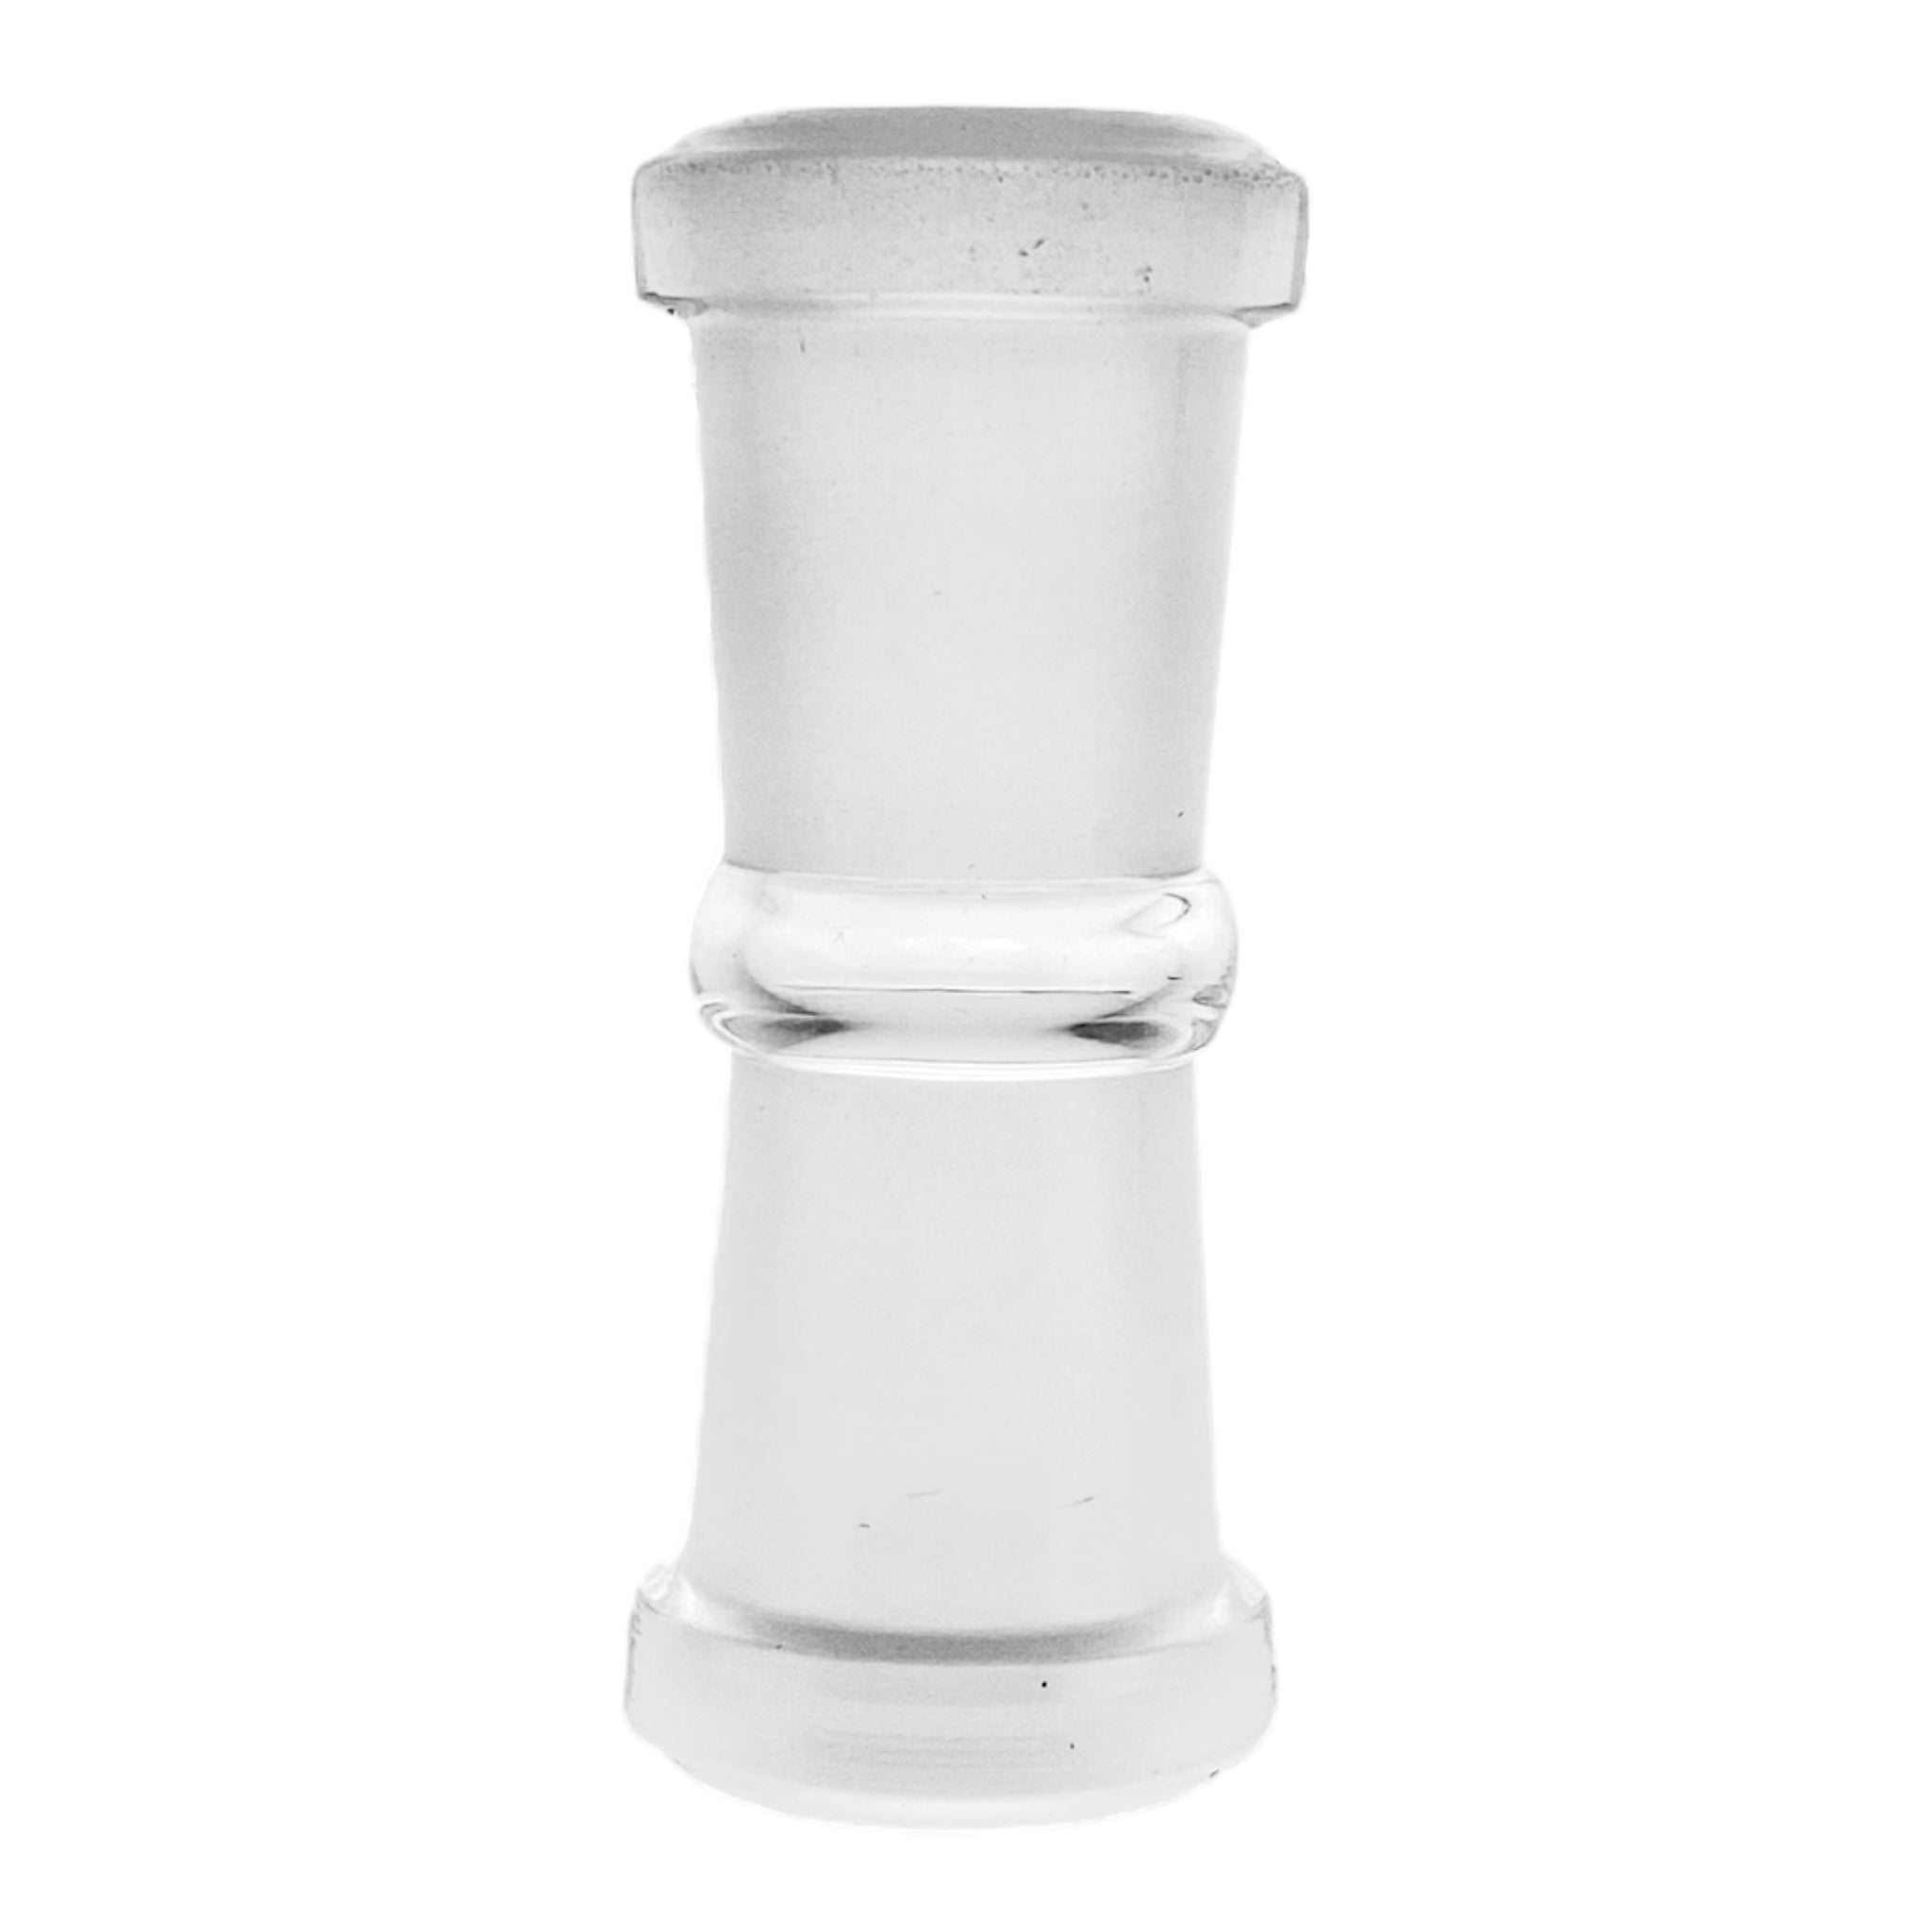 Glass Adapter For Bongs And Dab Rigs - 14mm Female To 14mm Female